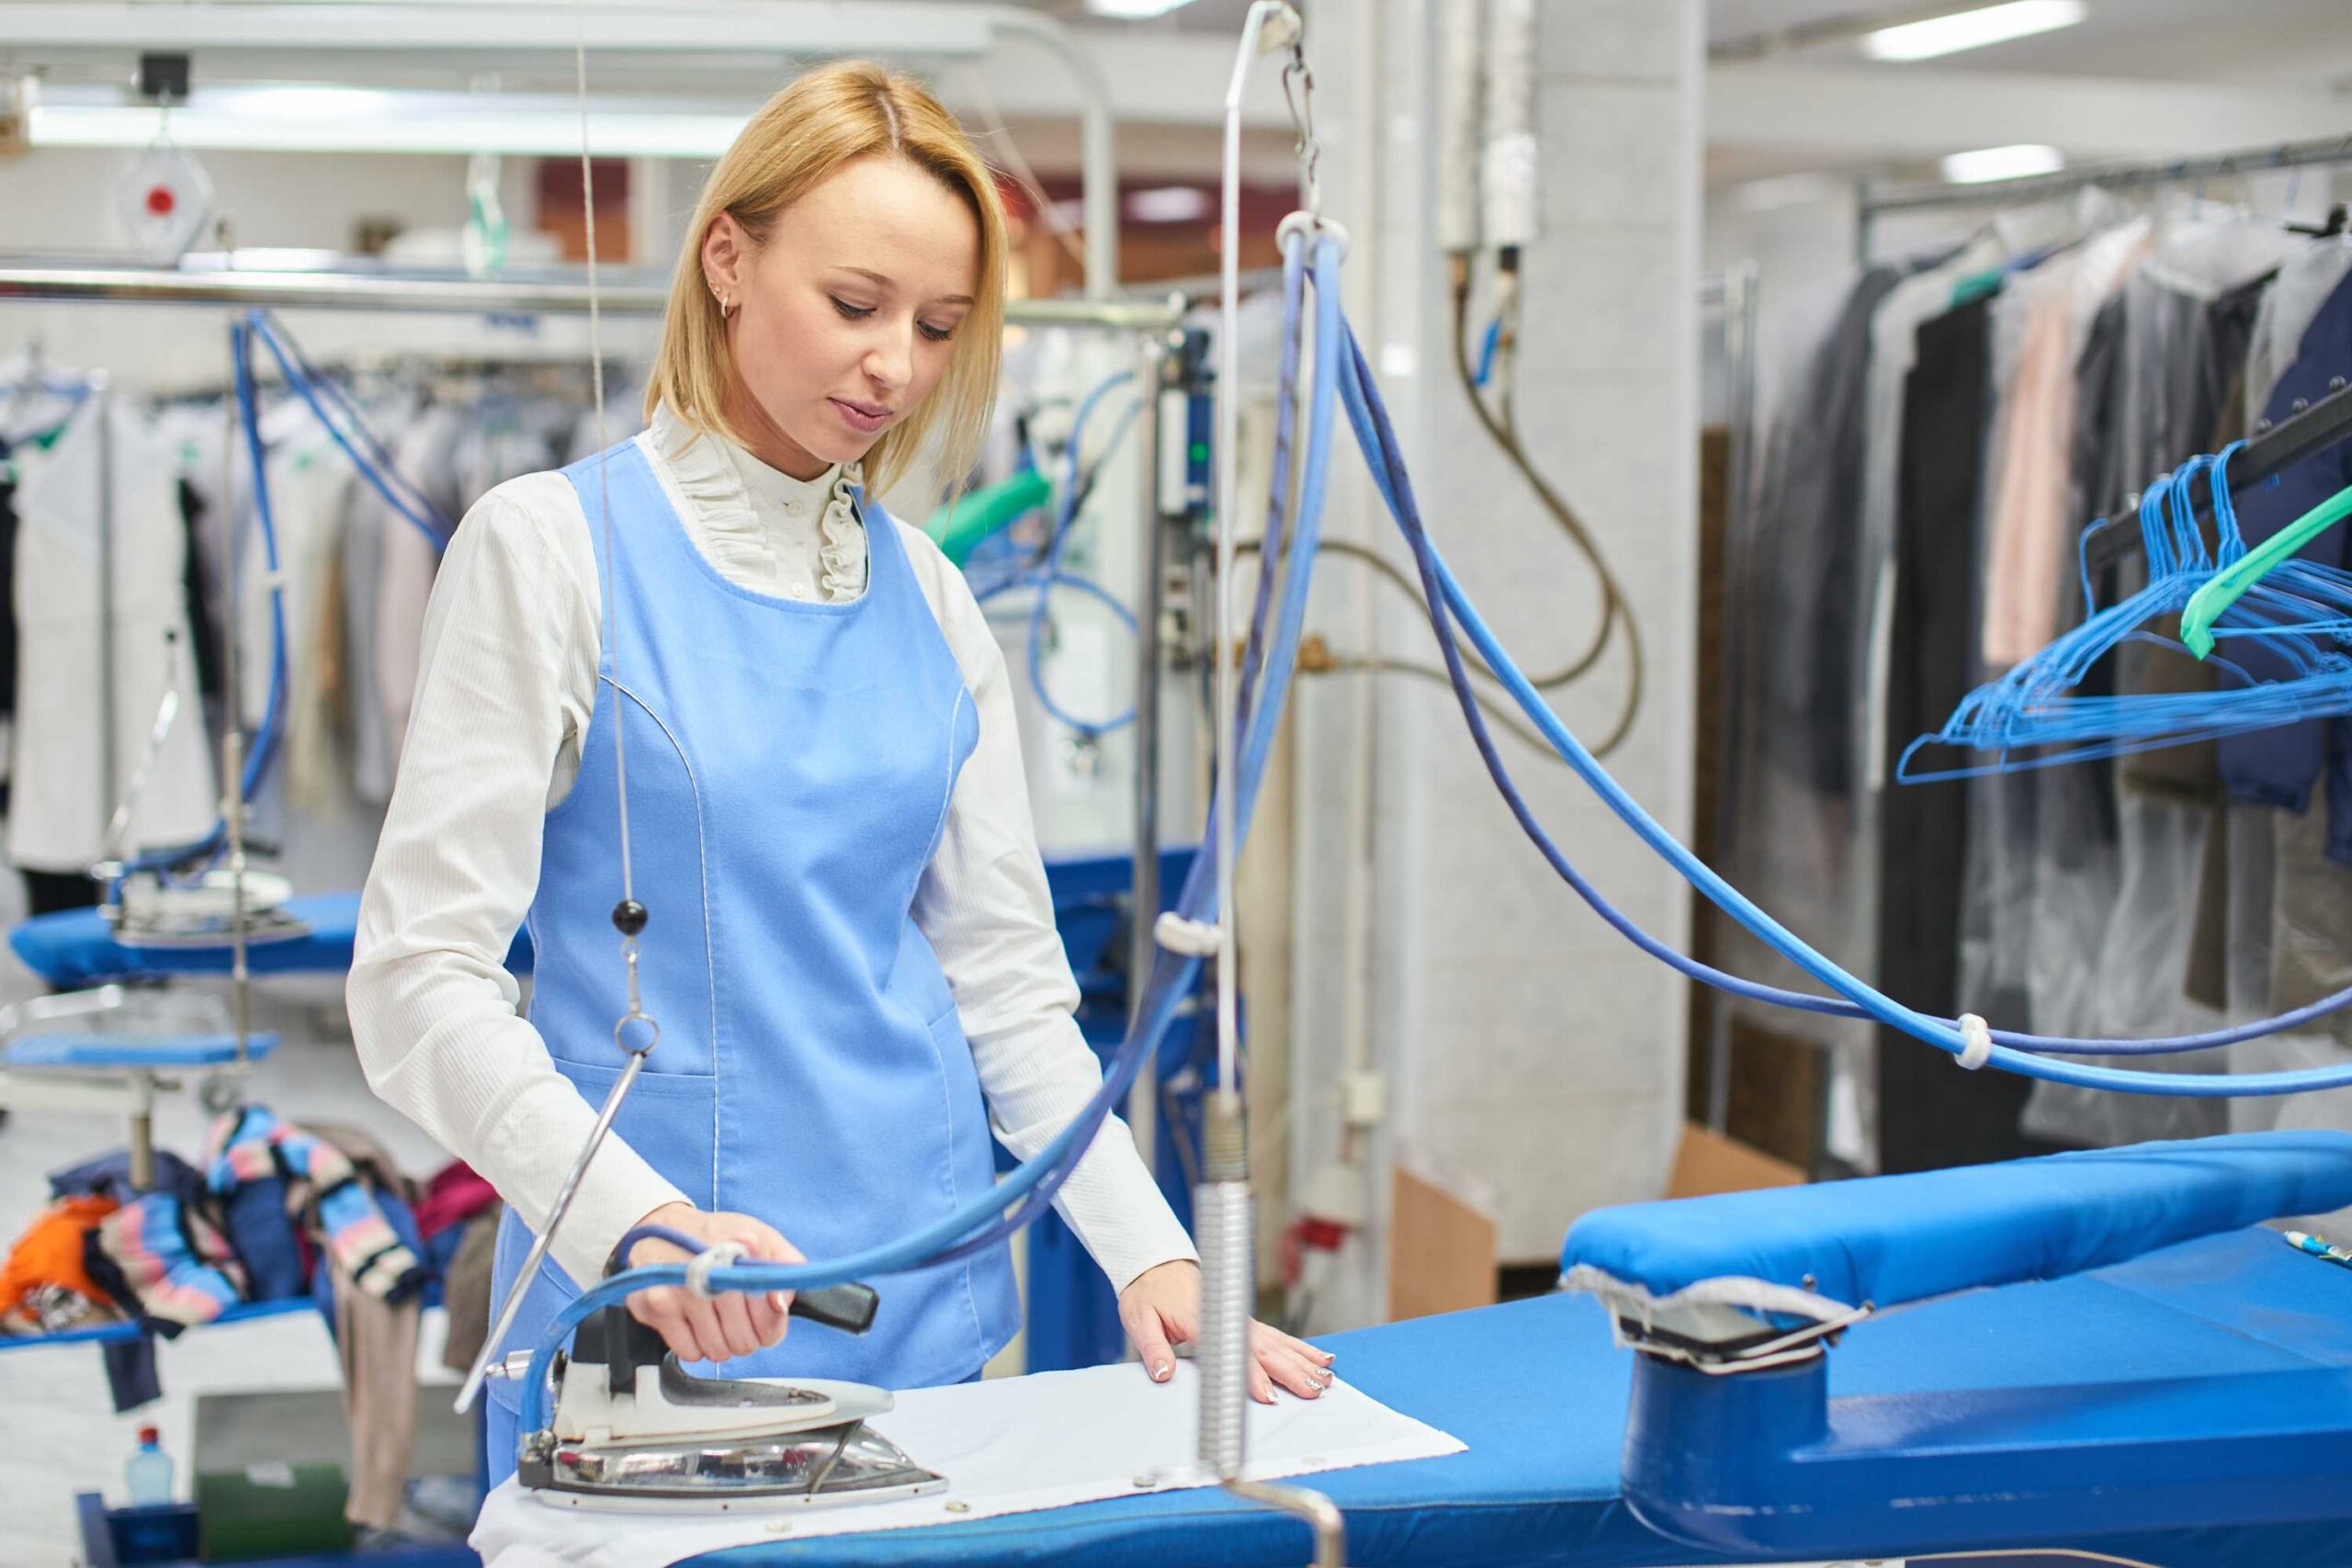 Dry Cleaning Services: Tips, Benefits, and FAQs